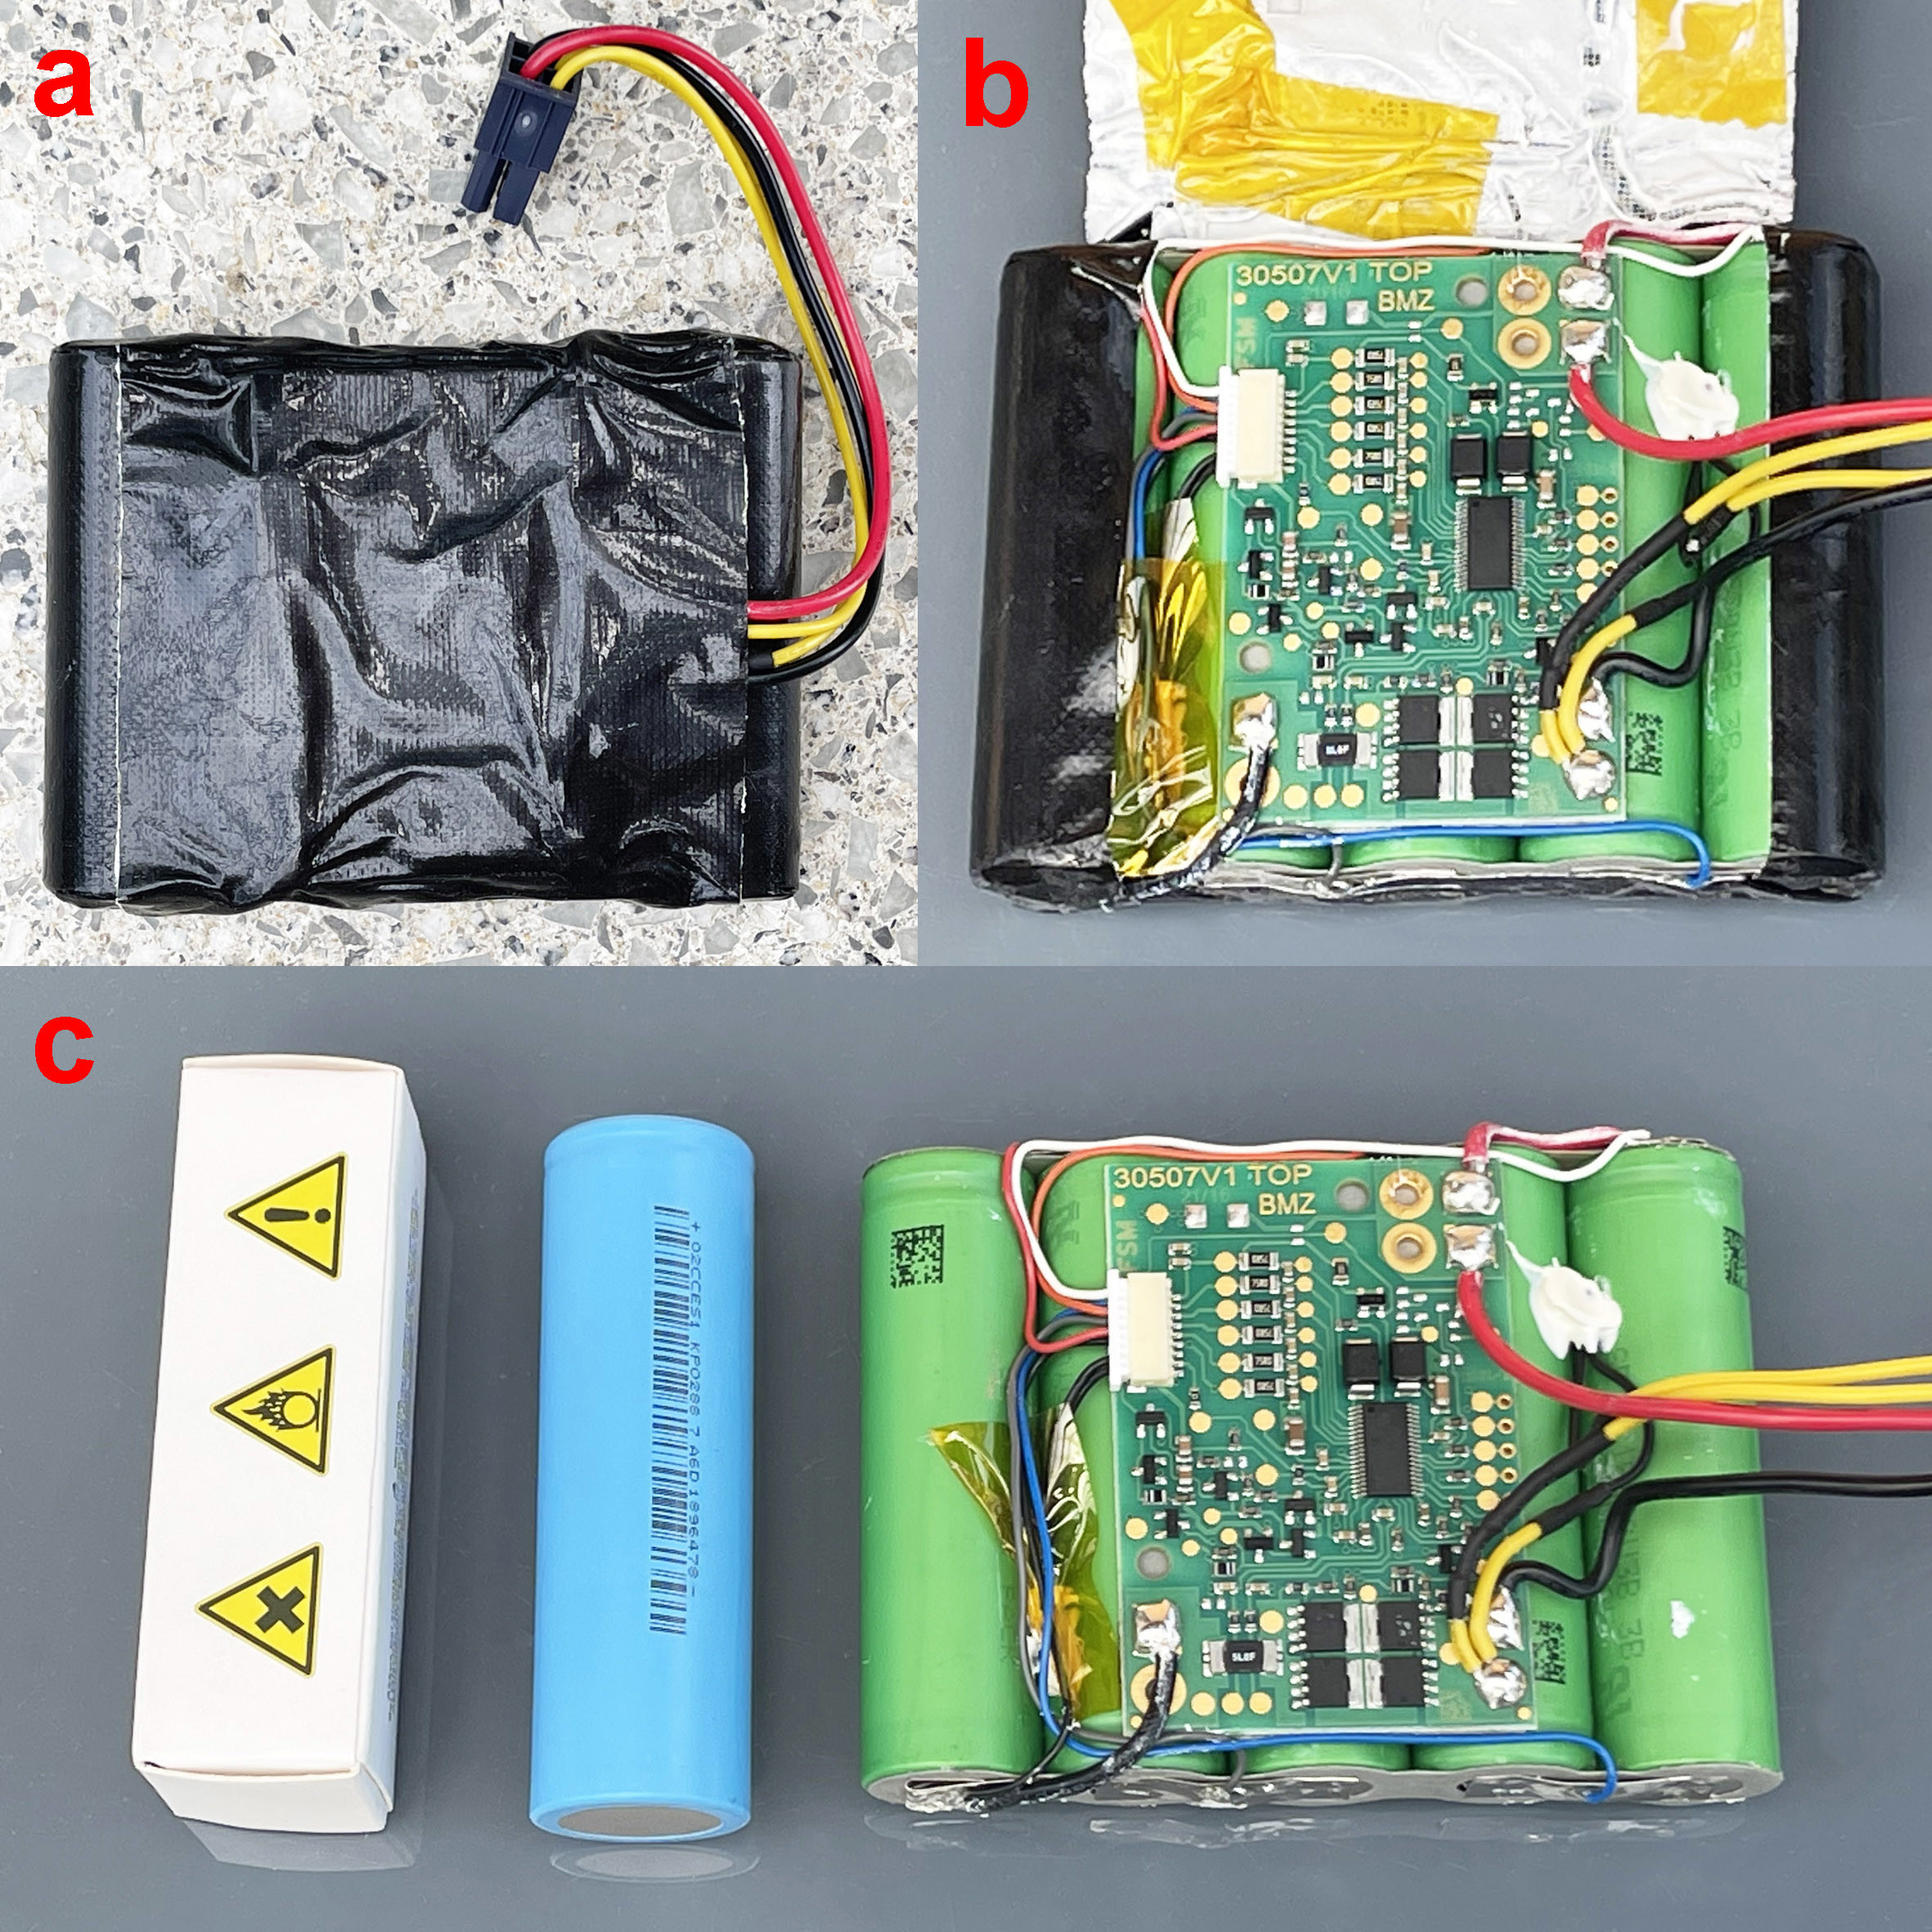 The old battery pack, the cells and BMS